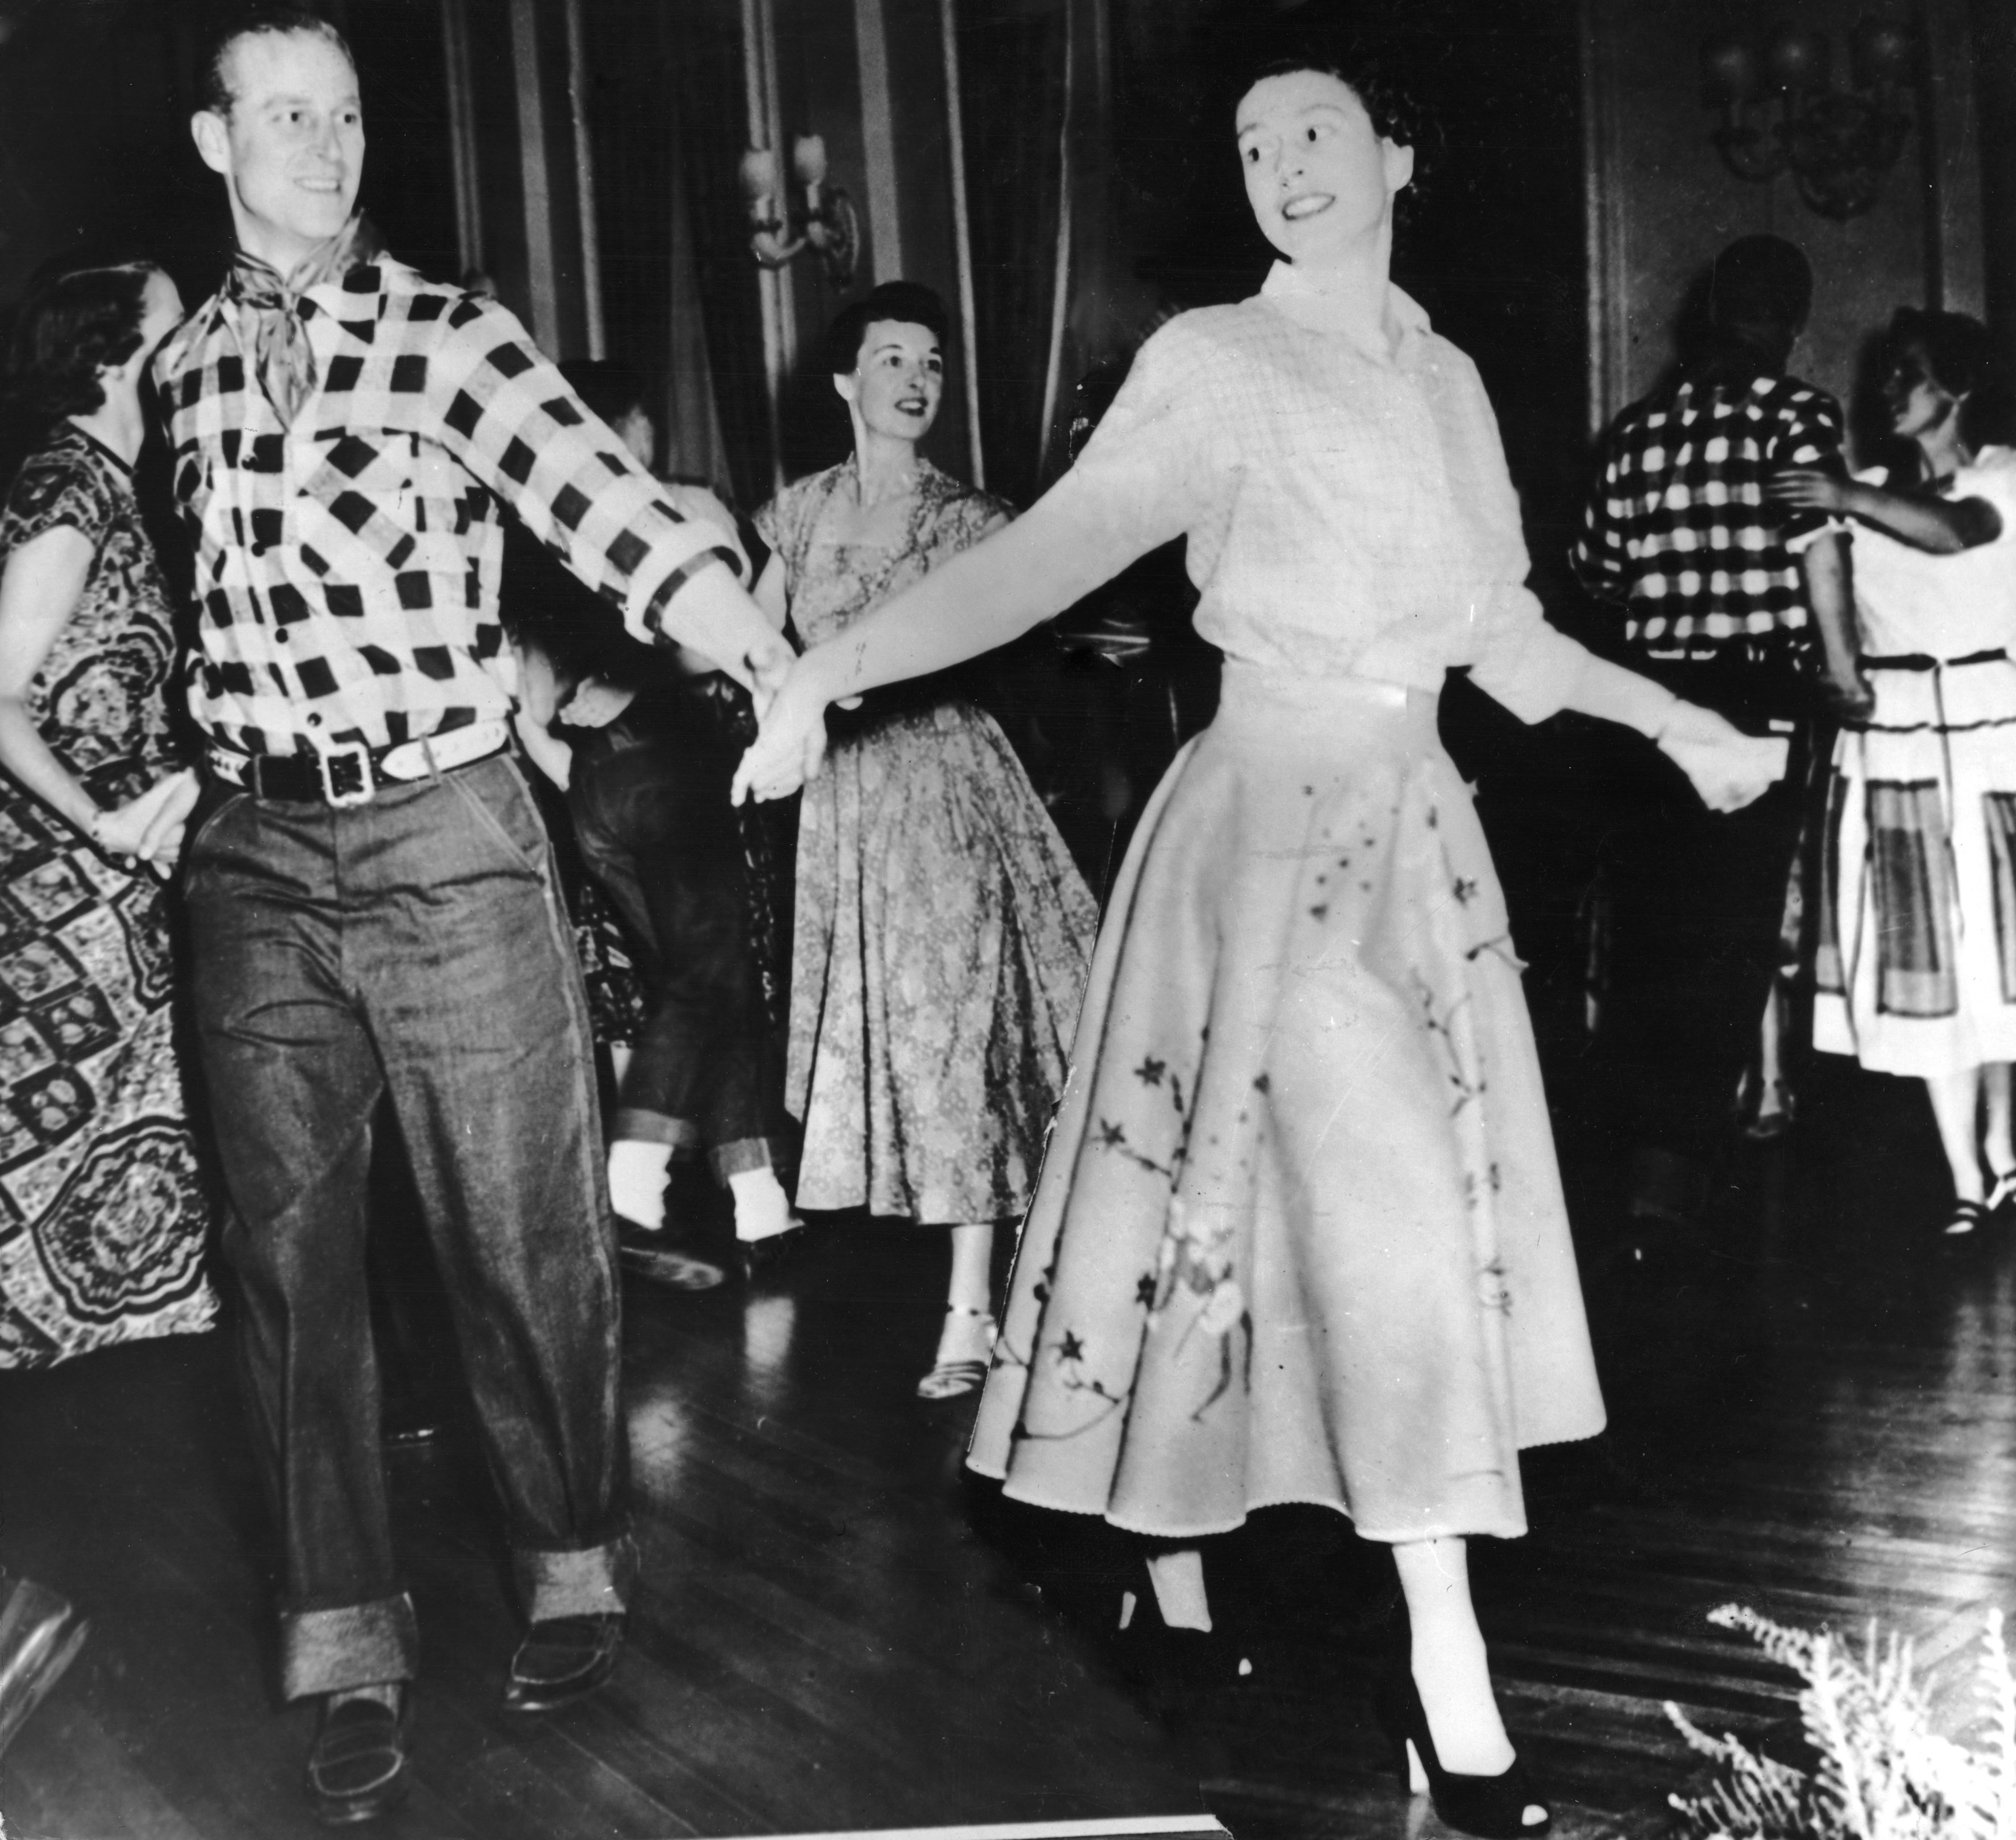 The Duke of Edinburgh dances with his wife, Princess Elizabeth, at a square dance held in their honour in Ottawa, by Governor General Viscount Alexander, Oct. 17, 1951. The dance was one of the events arranged during their Canadian tour. (Keystone/Hulton Archive—Getty Images)